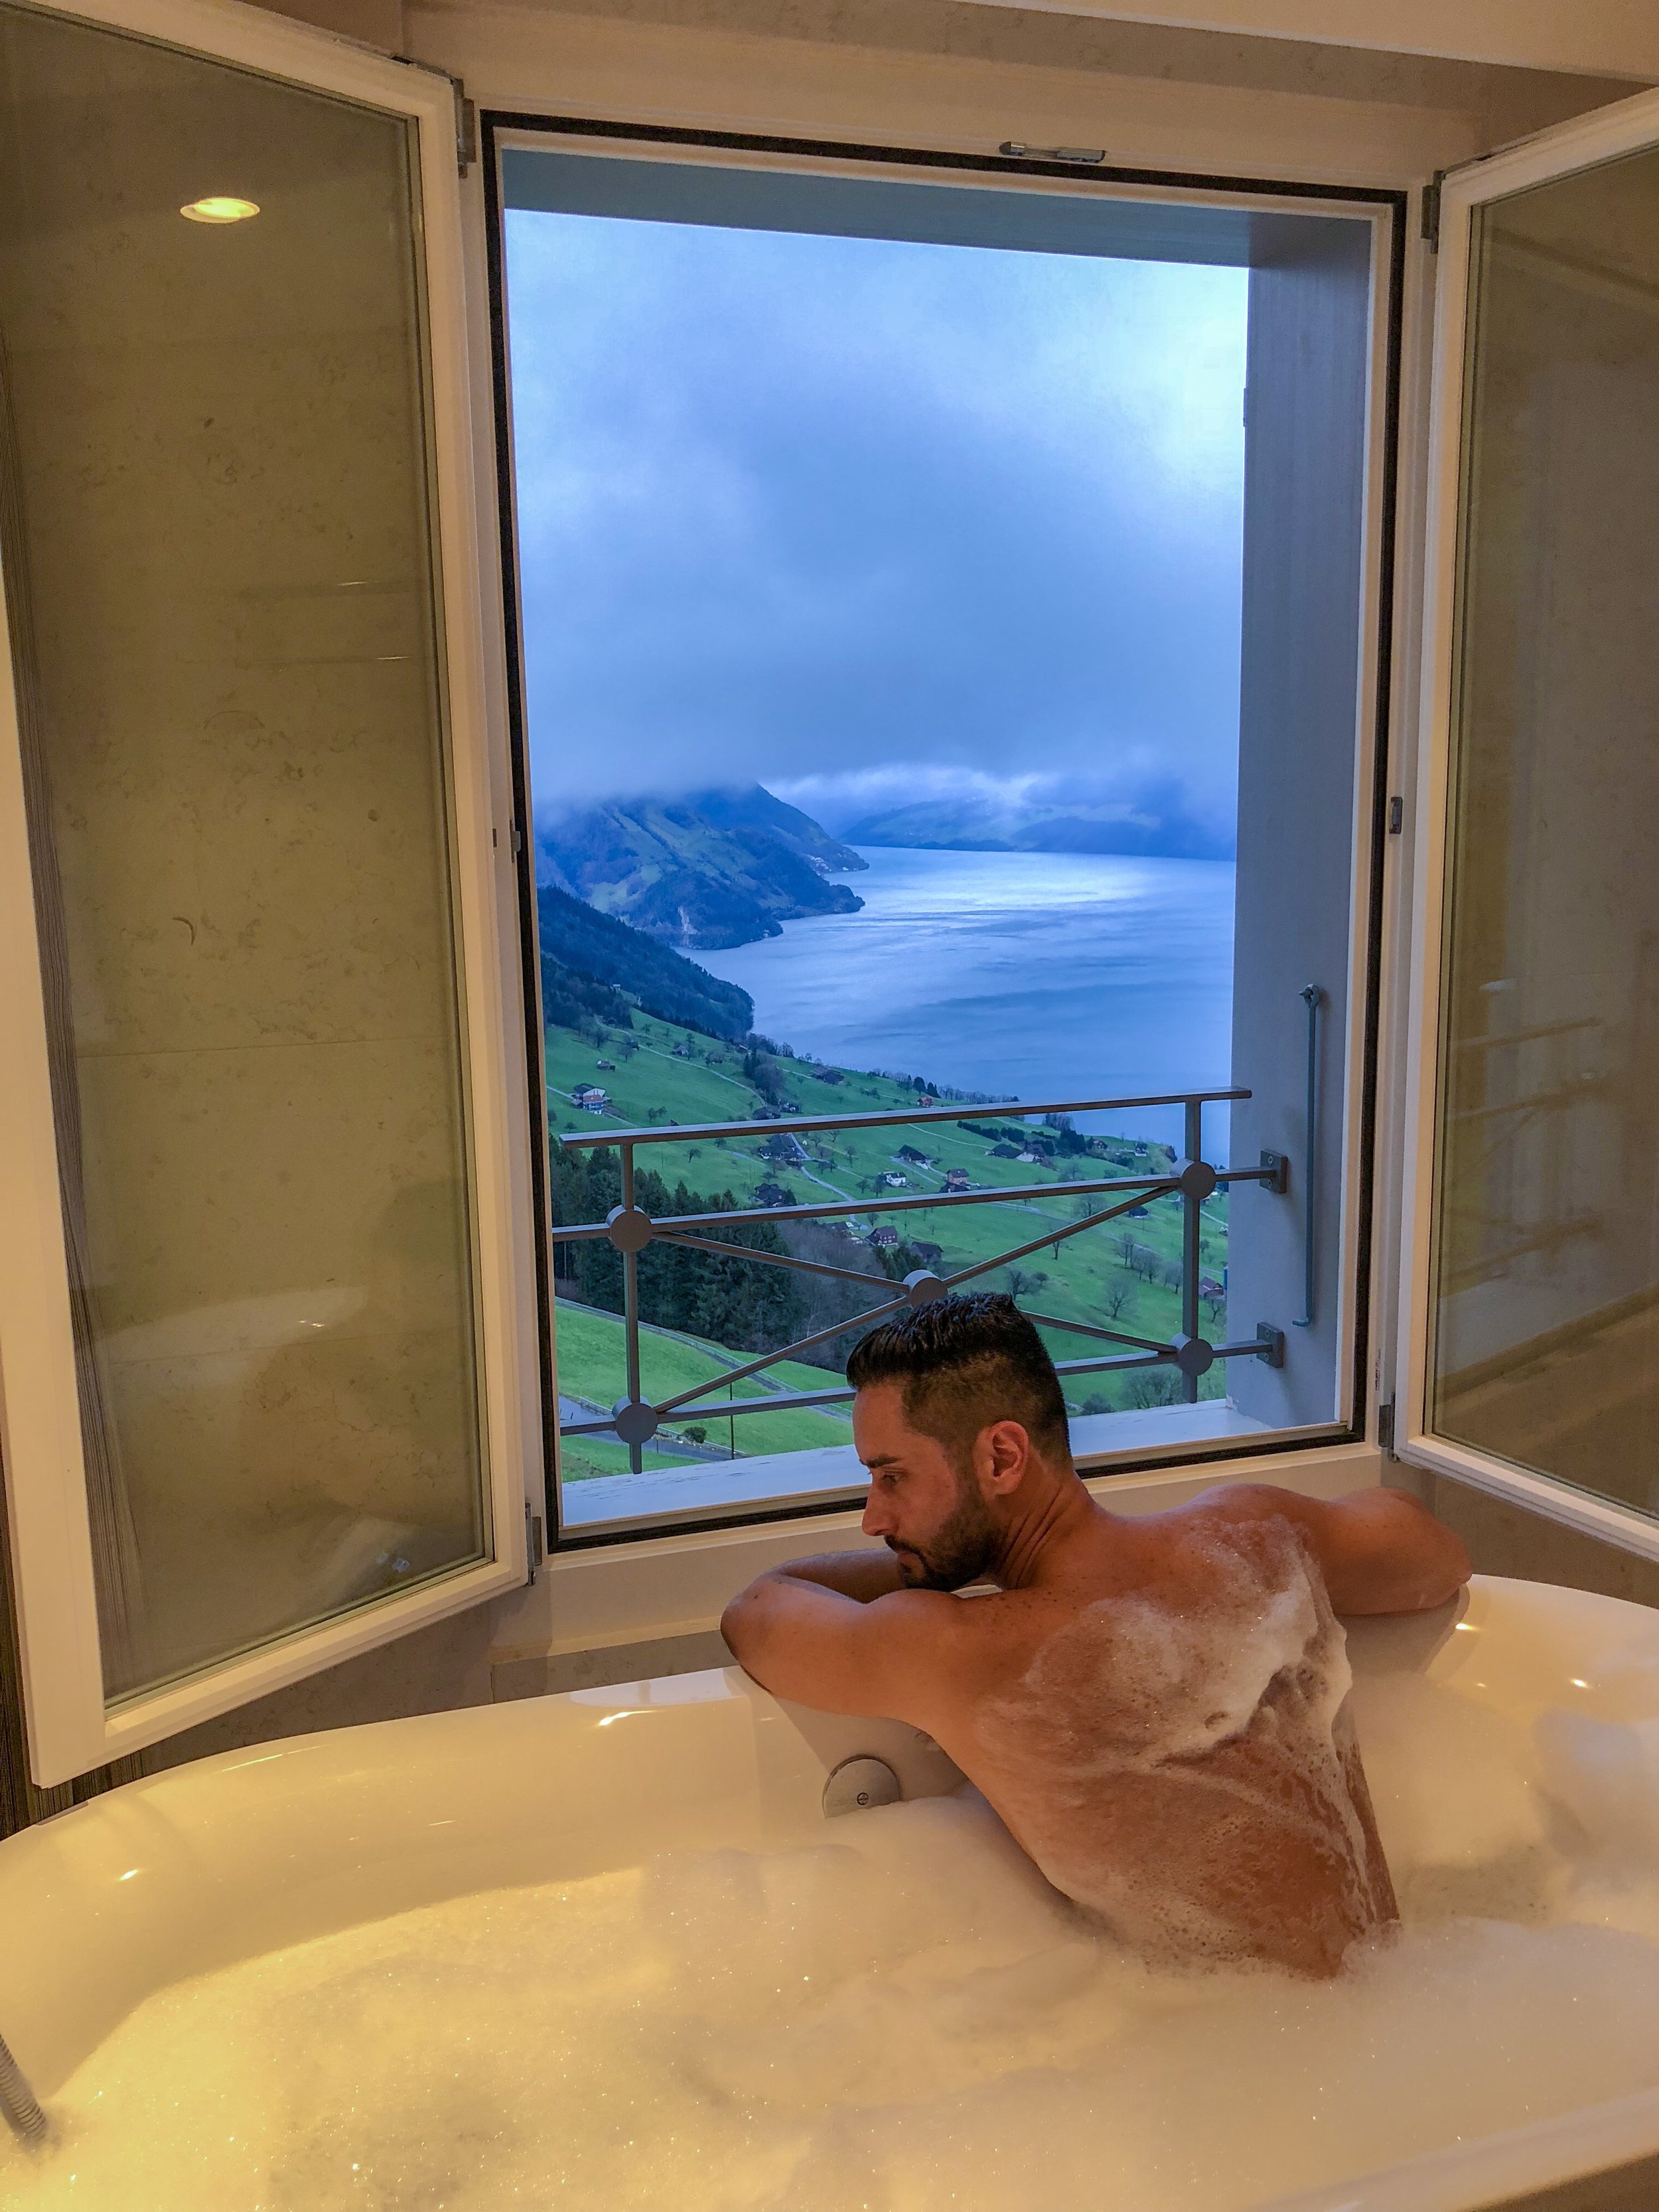 BUBBLE BATH WITH A VIEW